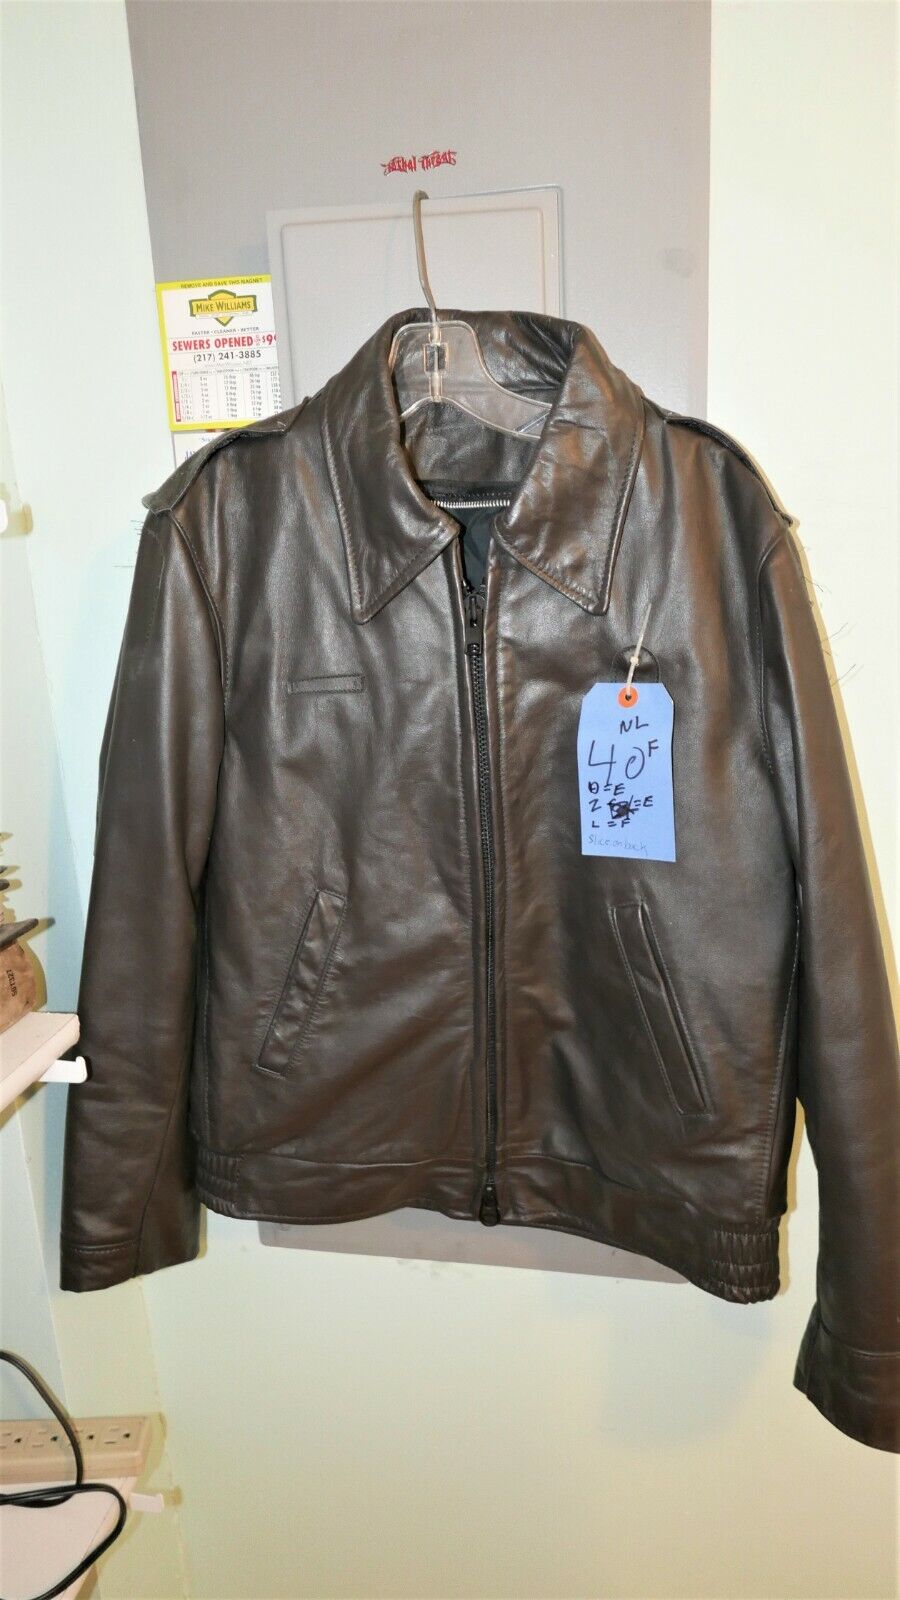 Taylors Leatherwear Uniform Leather High quality new Jacket 2nds favorite or Overstock Sa